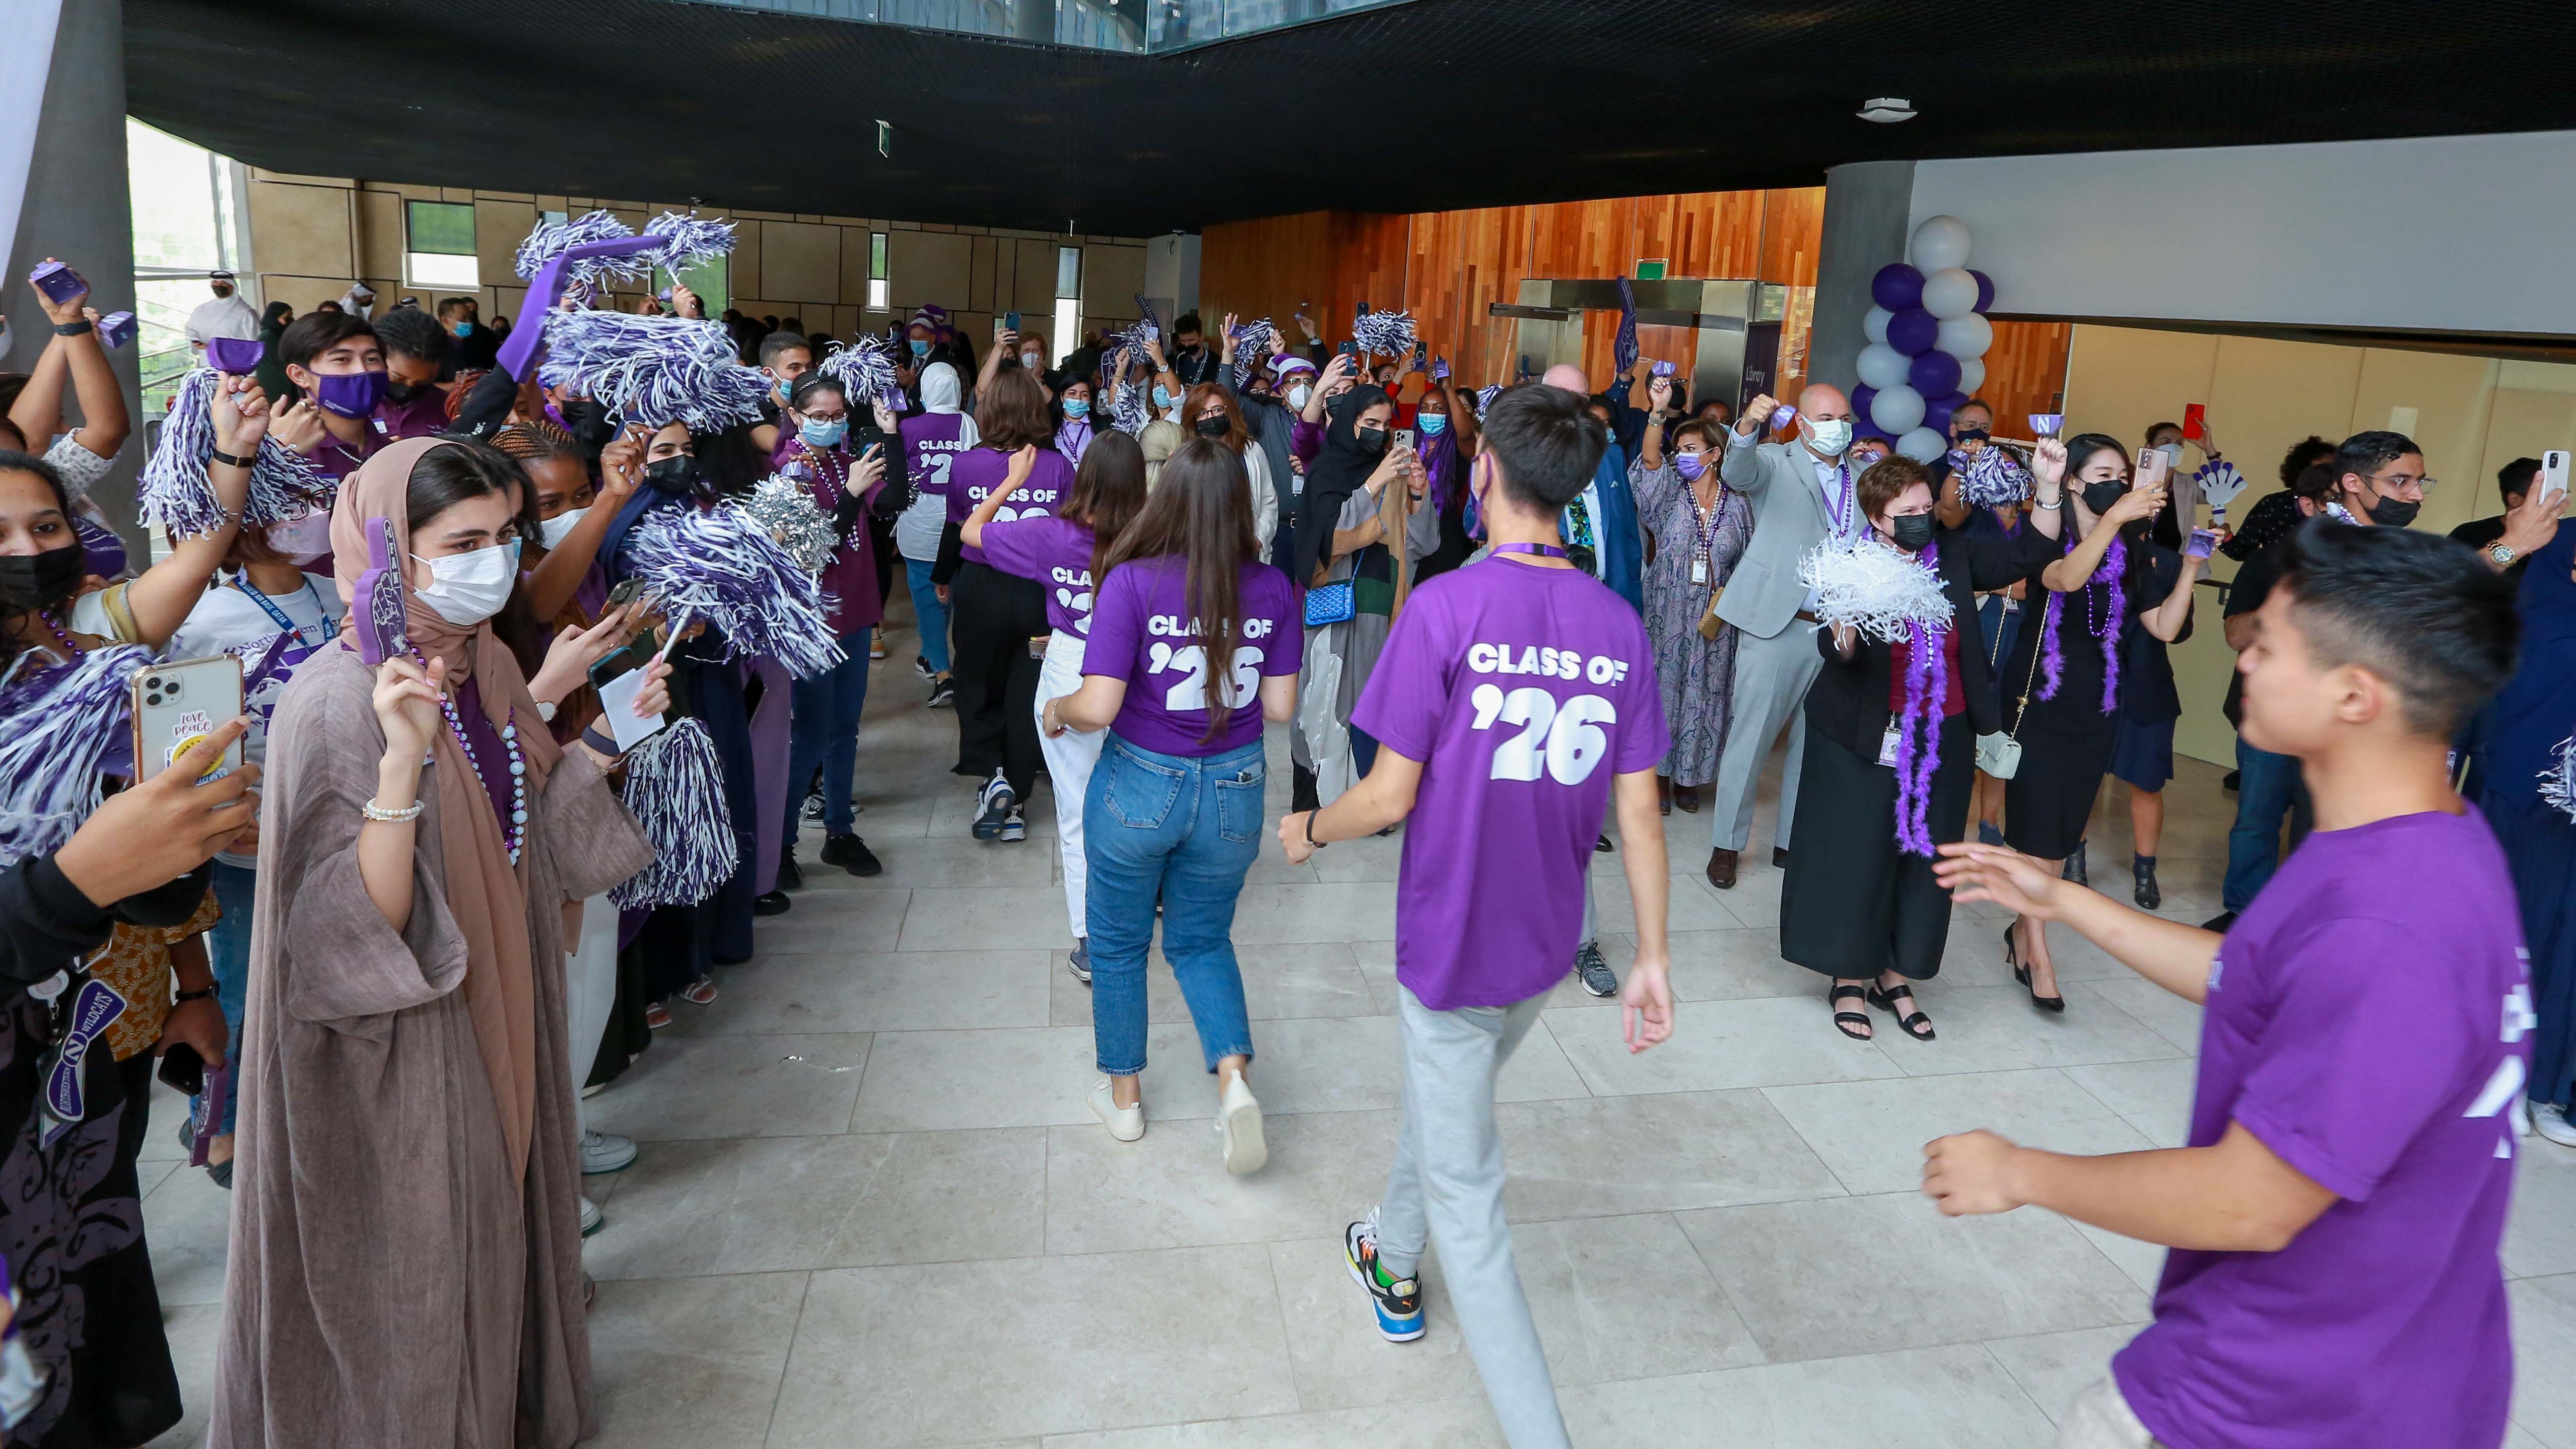 At the start of every academic year, current students, faculty, friends, and other members of the community line the Wildcat pathway to cheer on and welcome the newest members of the Northwestern community